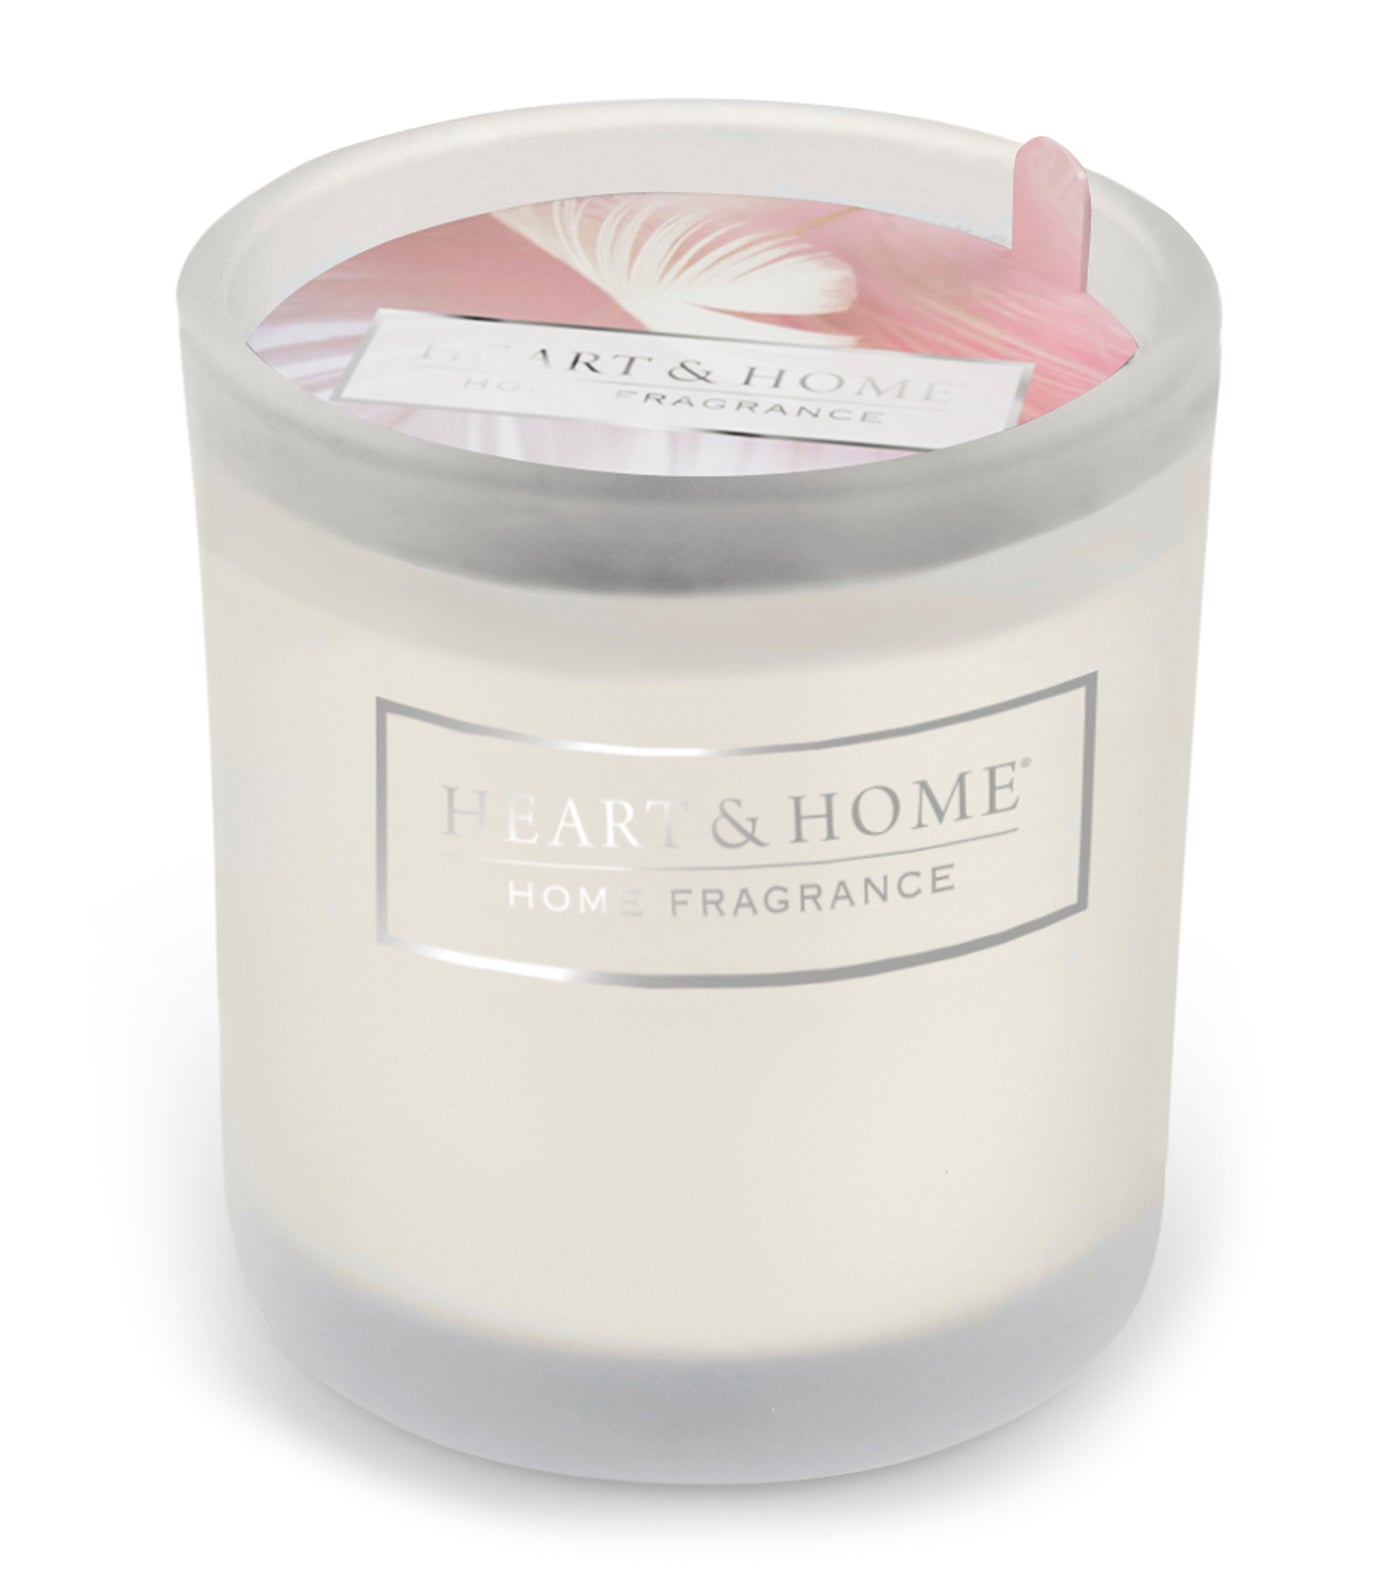 heart & home guardian angel - glass votive soy candle